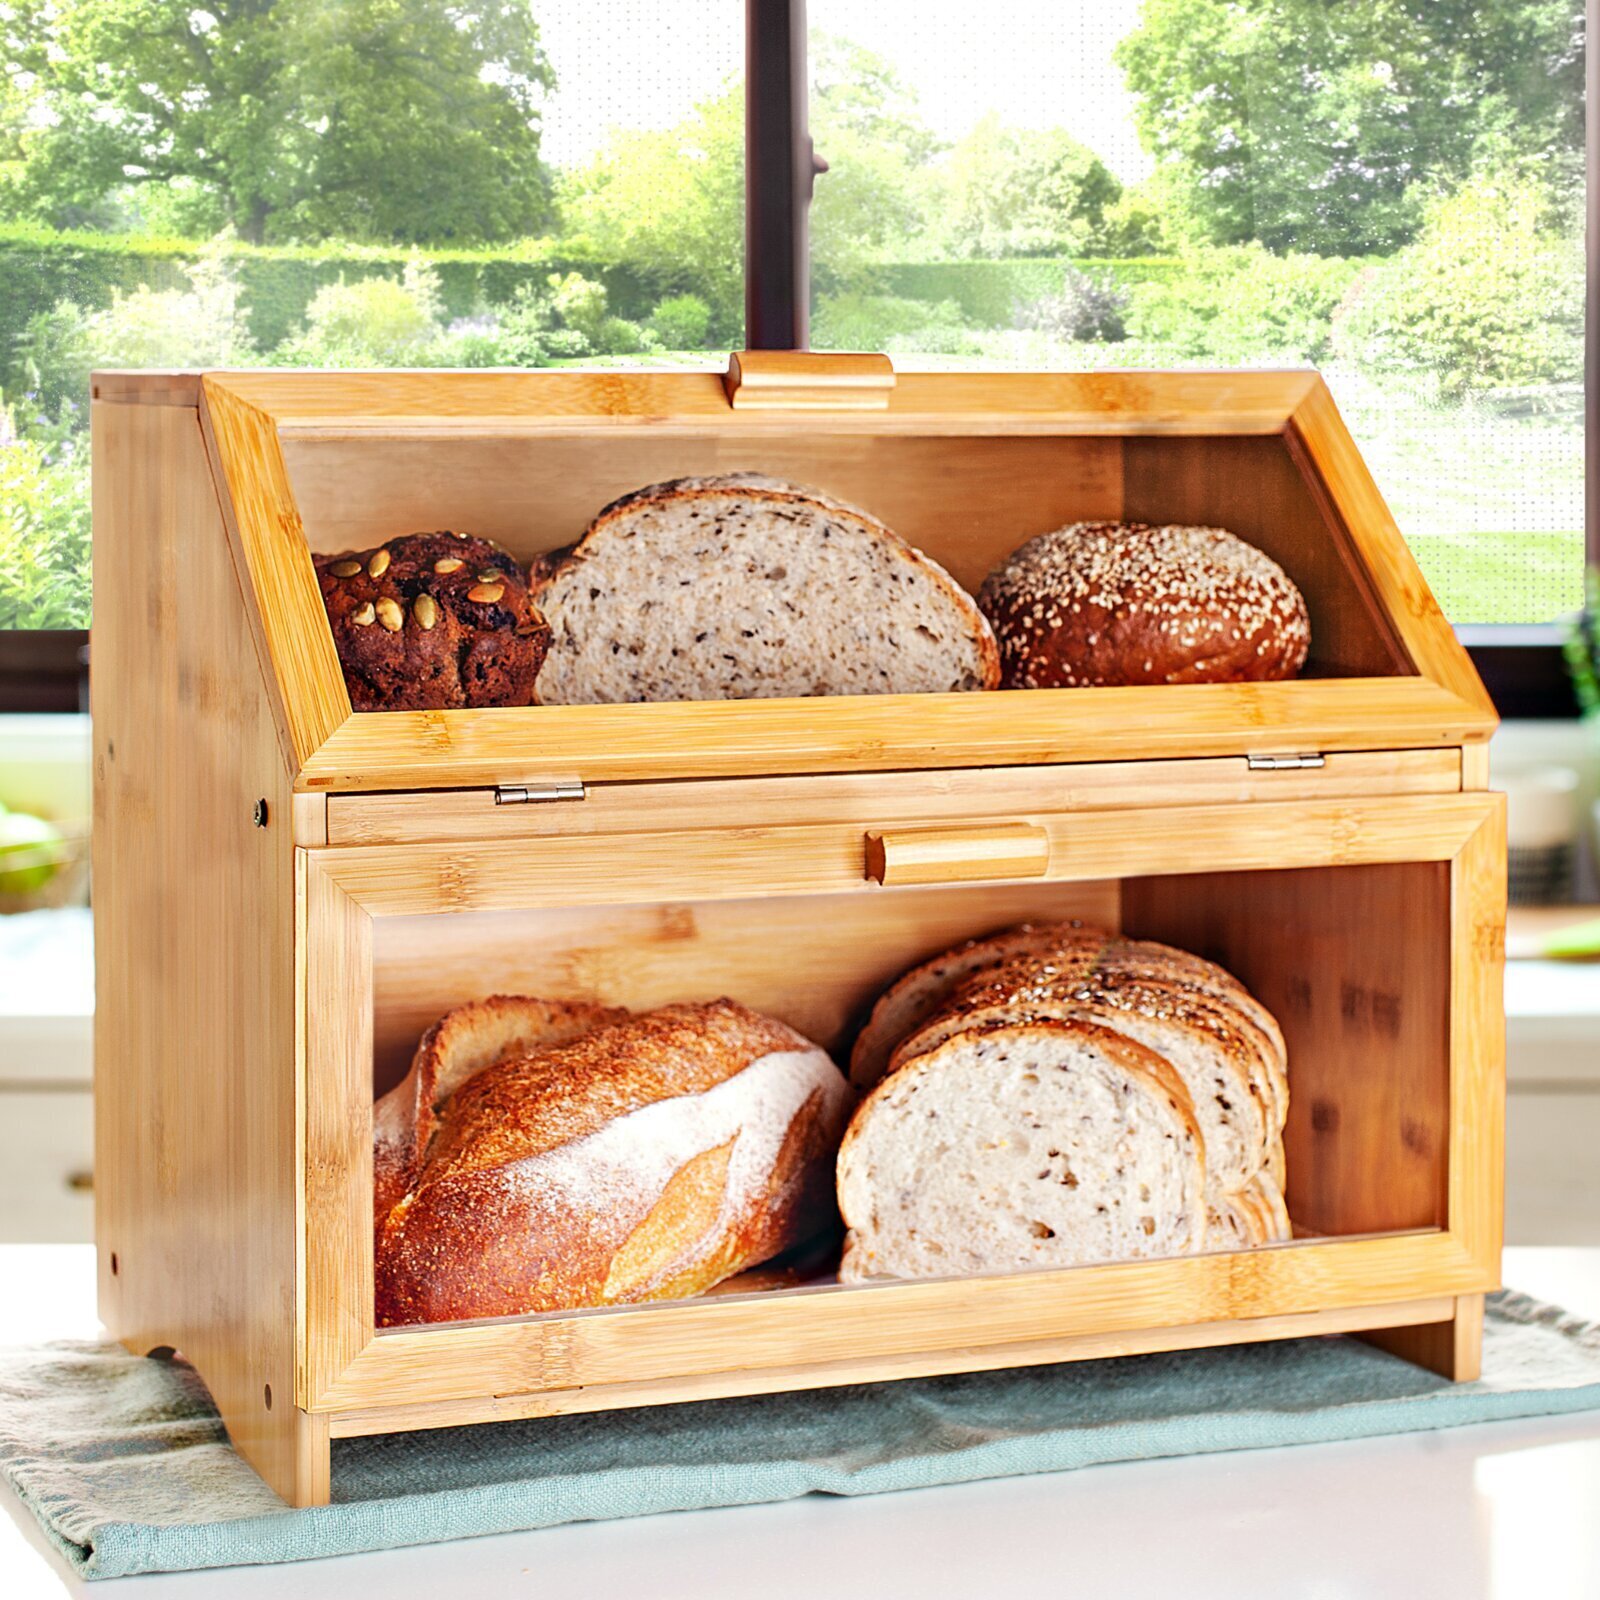 Bread Box Wooden Stainless Steel Bread Box Carbonized Unique Look 